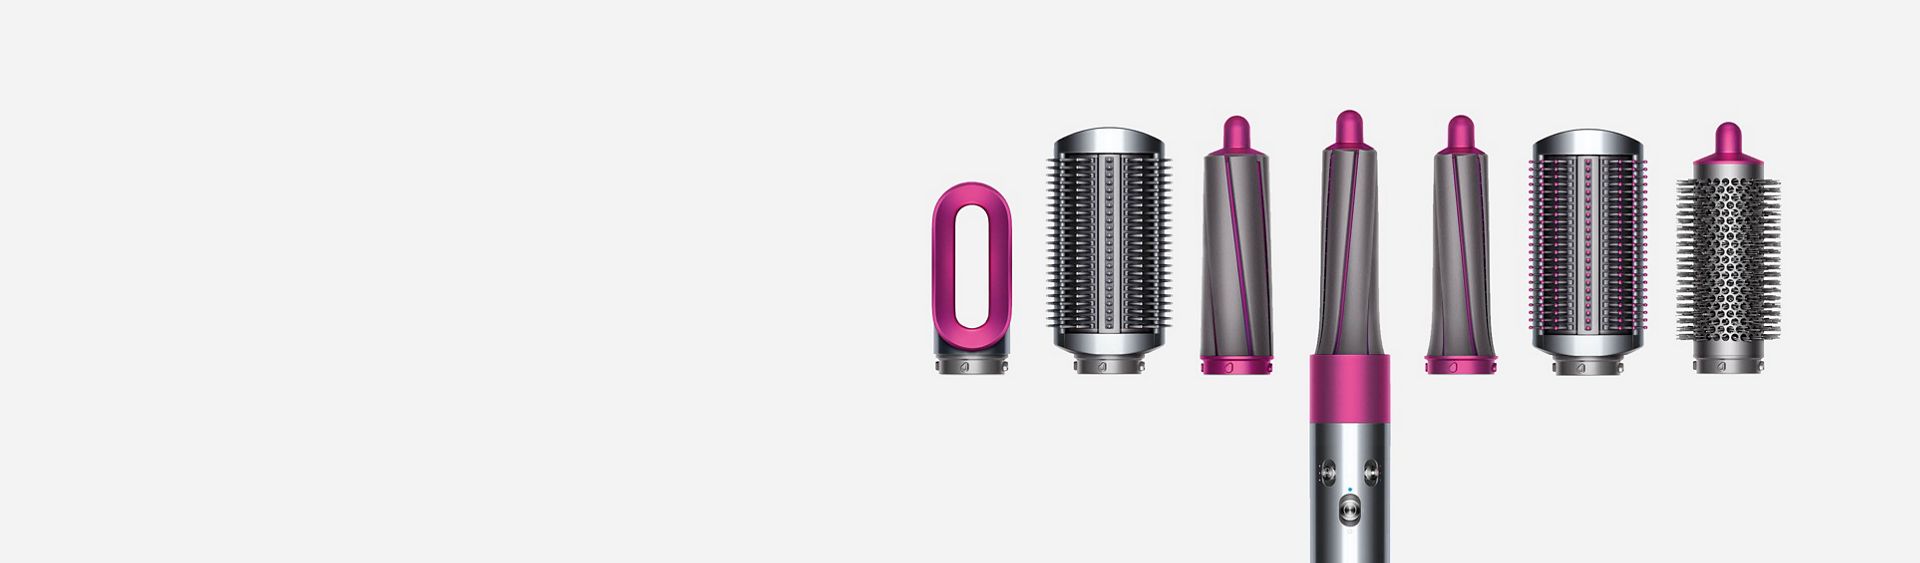 Support for your Dyson Airwrap™ styler| Dyson Australia